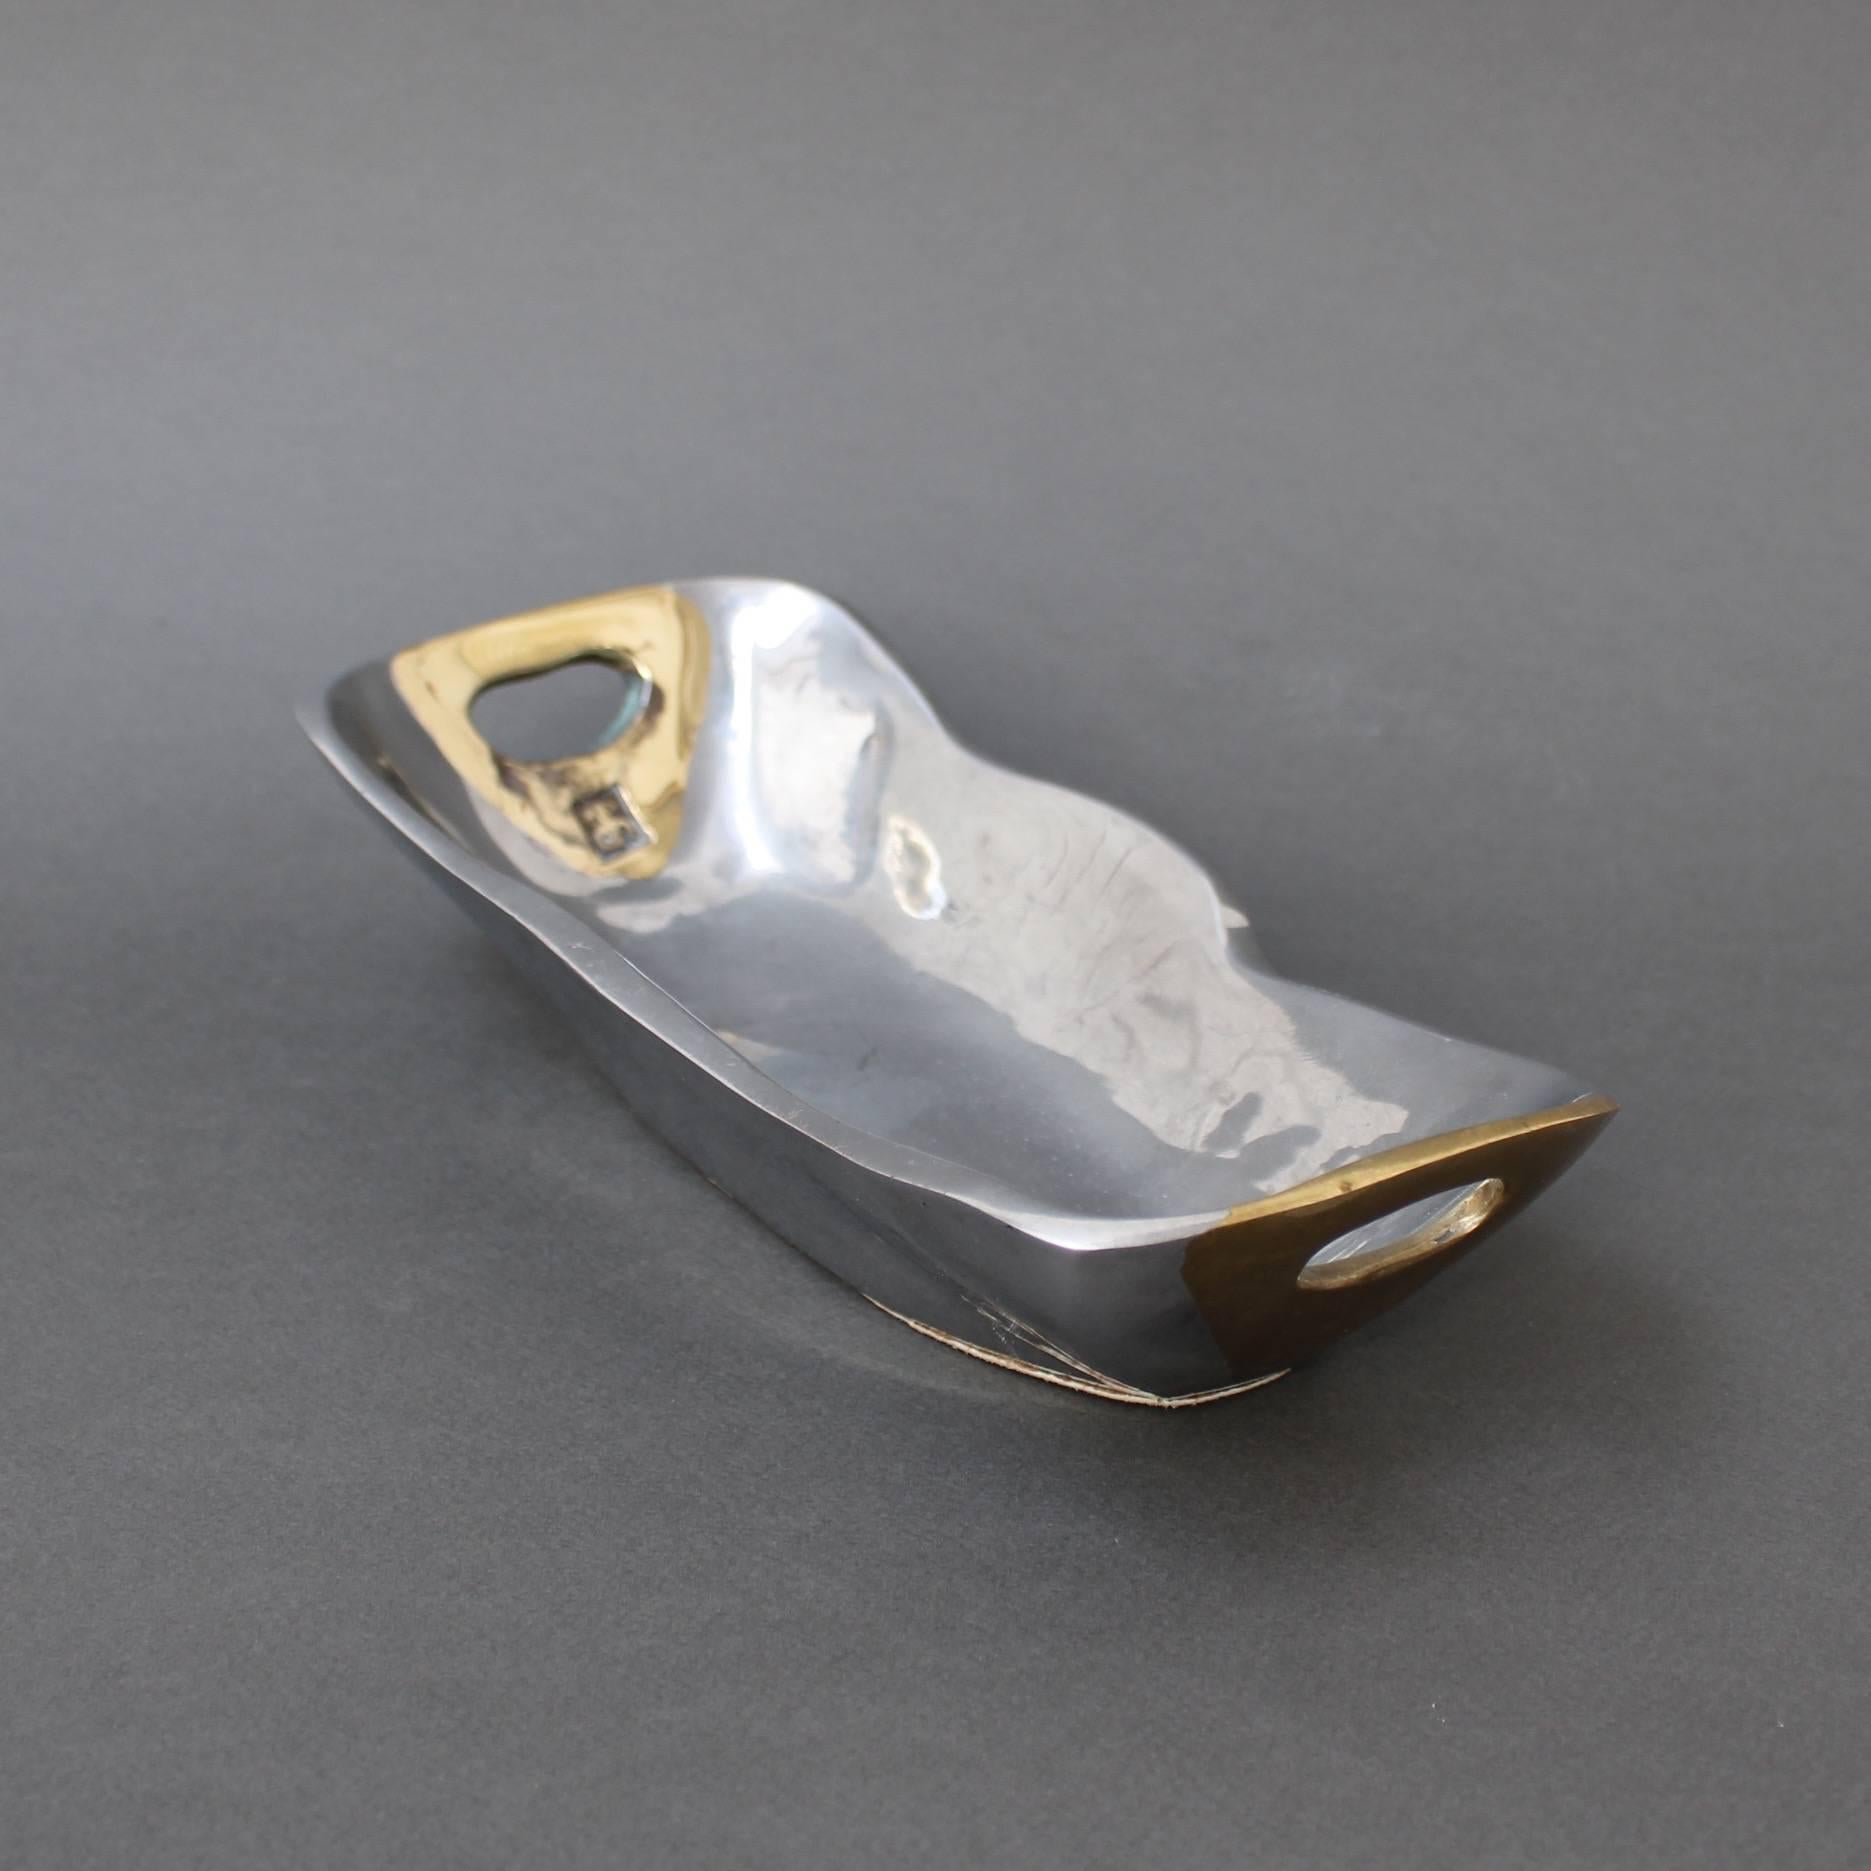 Aluminium and brass brutalist style tray by David Marshall, circa 1970s. In excellent vintage condition, this boat-shaped tray or vide-poche has retained much of its youthful appearance. The shiny aluminium forms the main structure and the brass